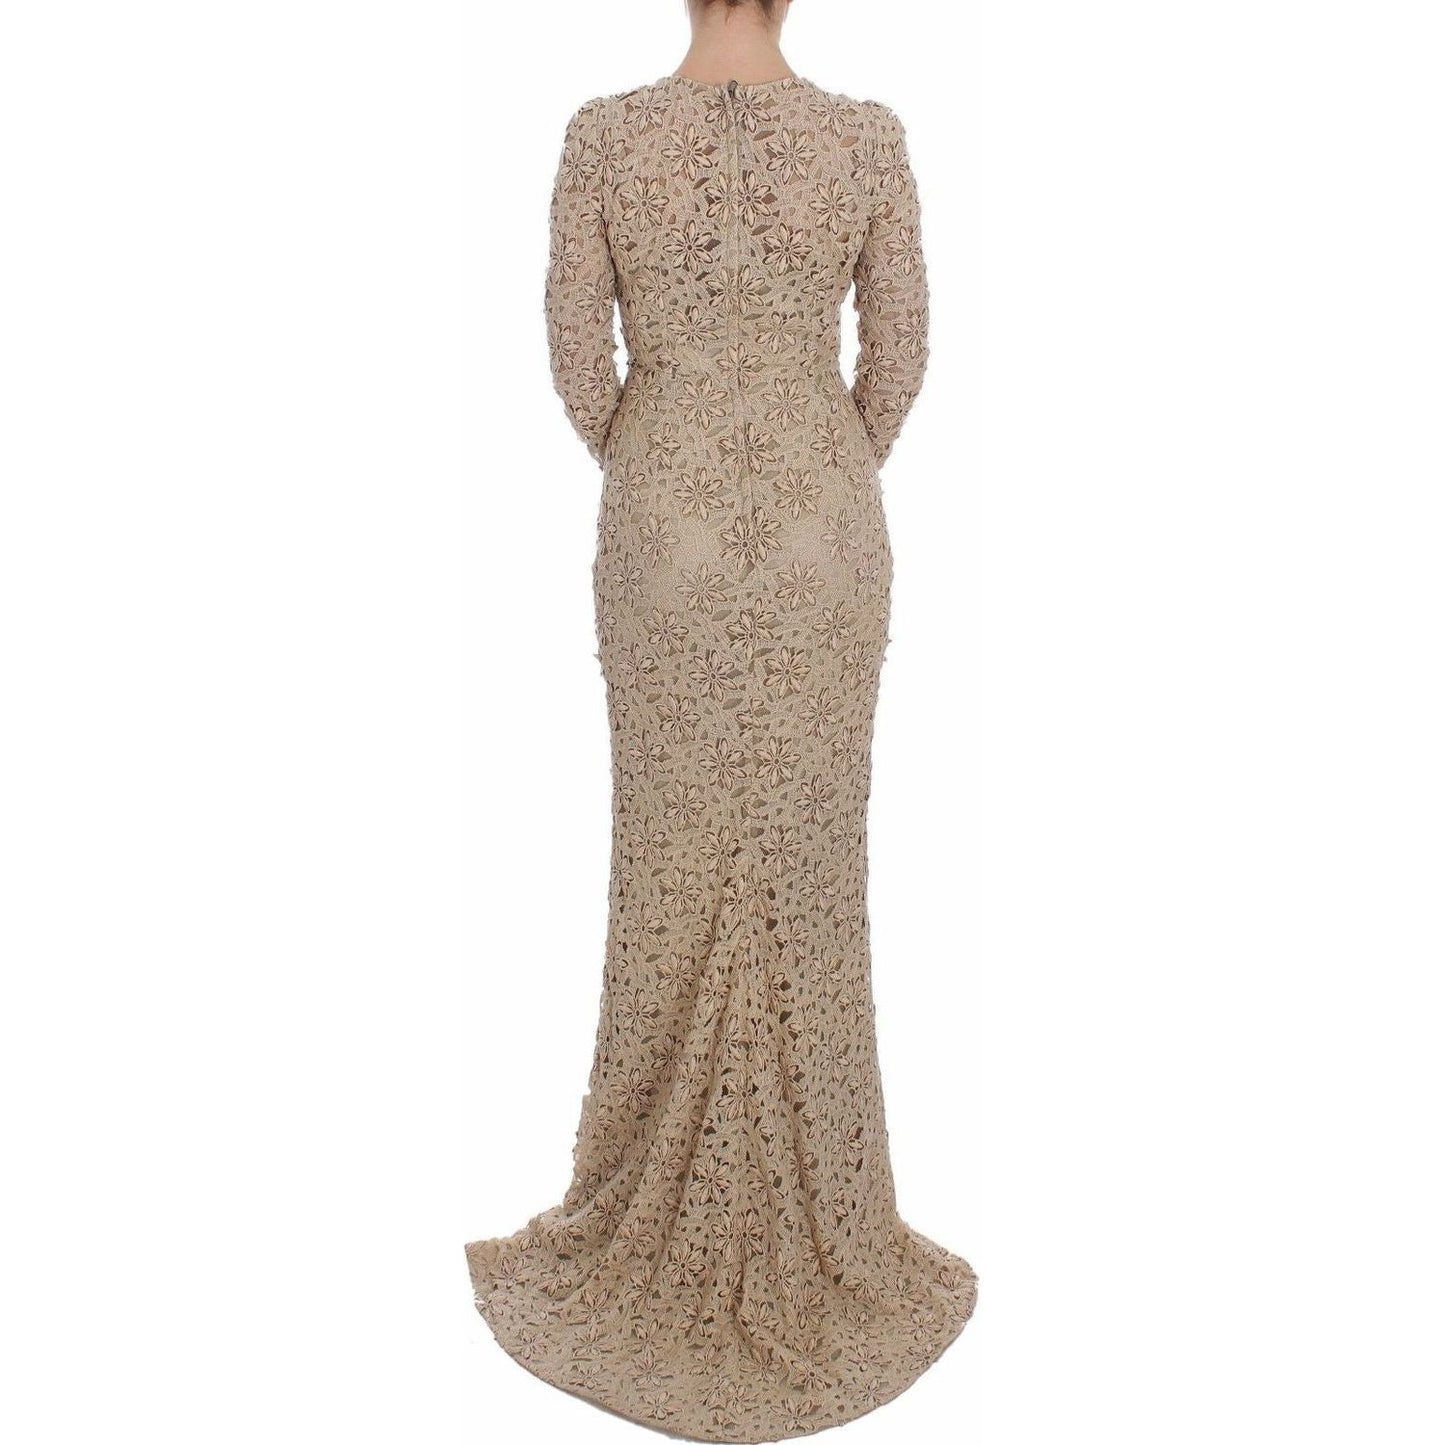 Dolce & Gabbana Beige Floral Lace Long Sleeve Maxi Dress beige-floral-lace-sheath-maxi-dress